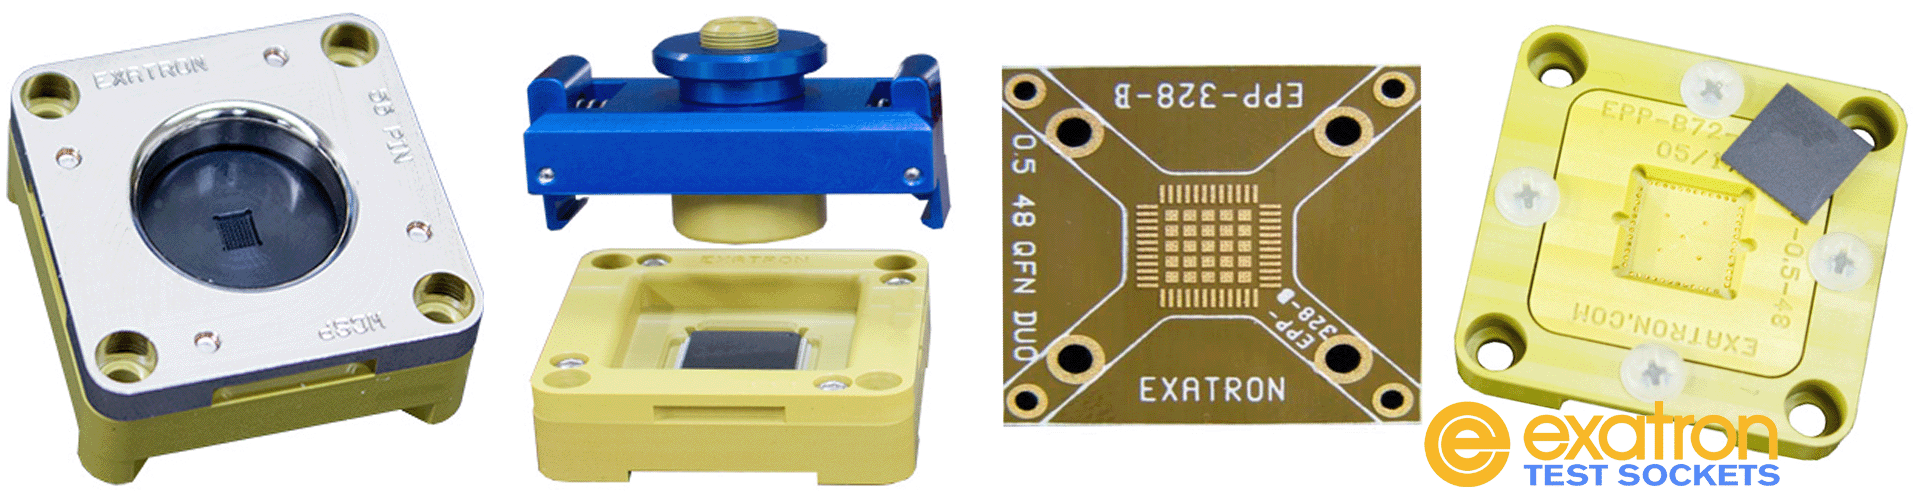 Exatron custom and standard IC device Test Sockets, spring probes, Particle interconnect